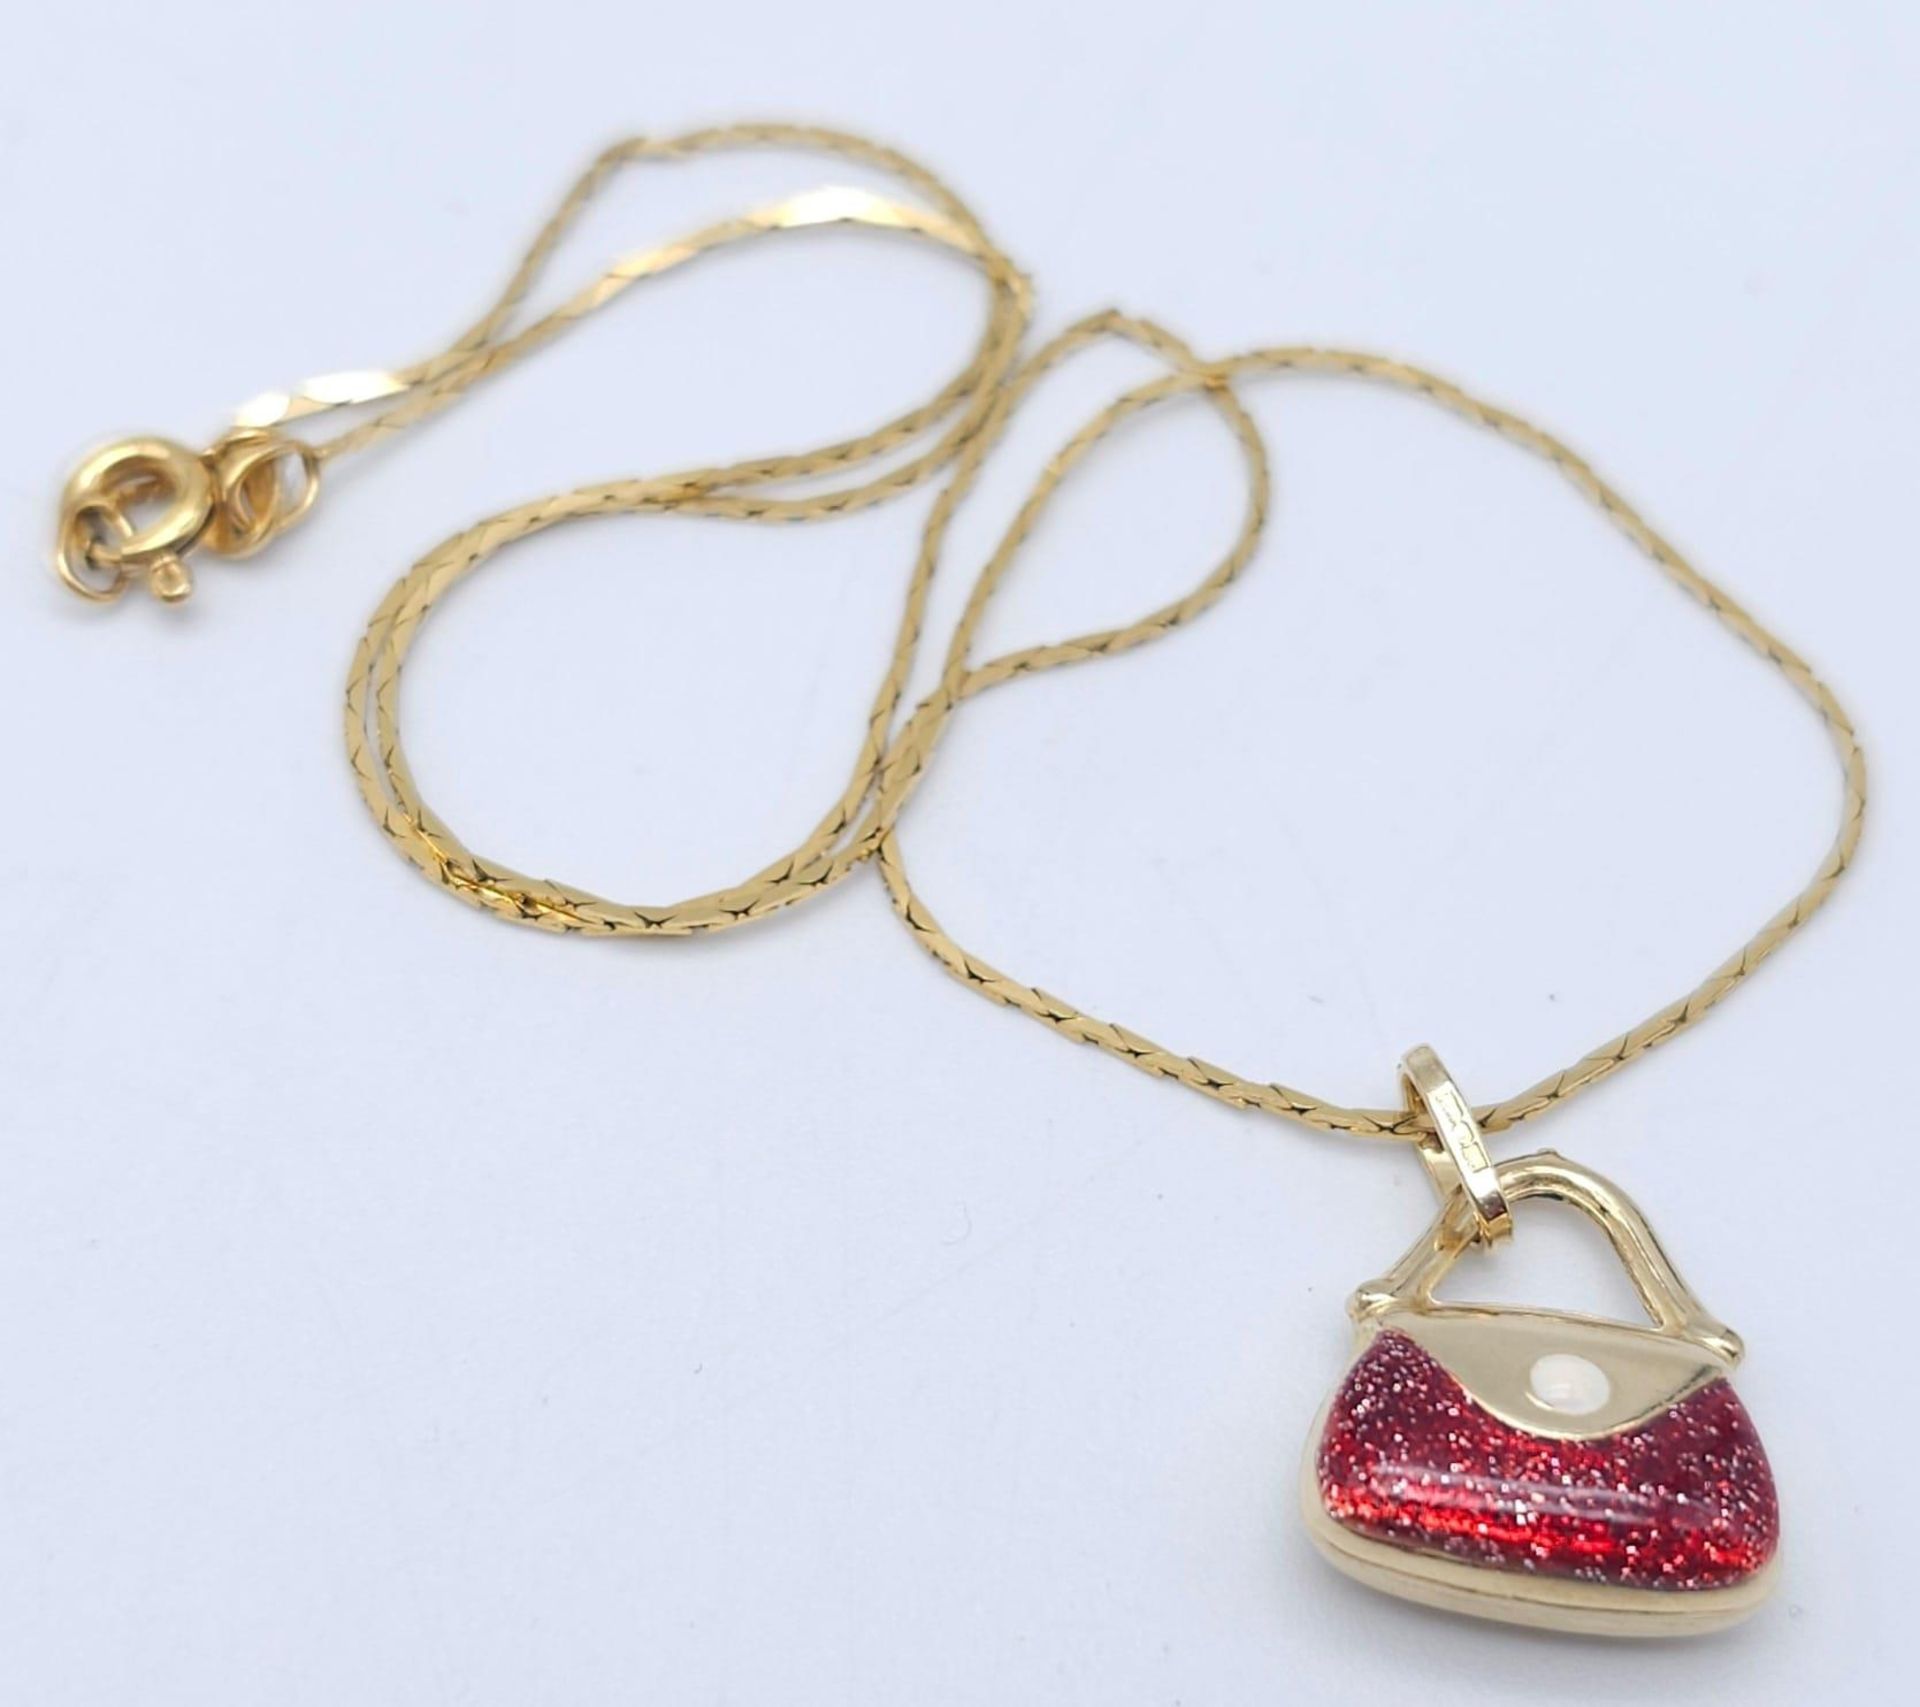 An Italian 14k Yellow Gold Pendant in the Shape of a Handbag with Red Glitter Enamel Detailing on